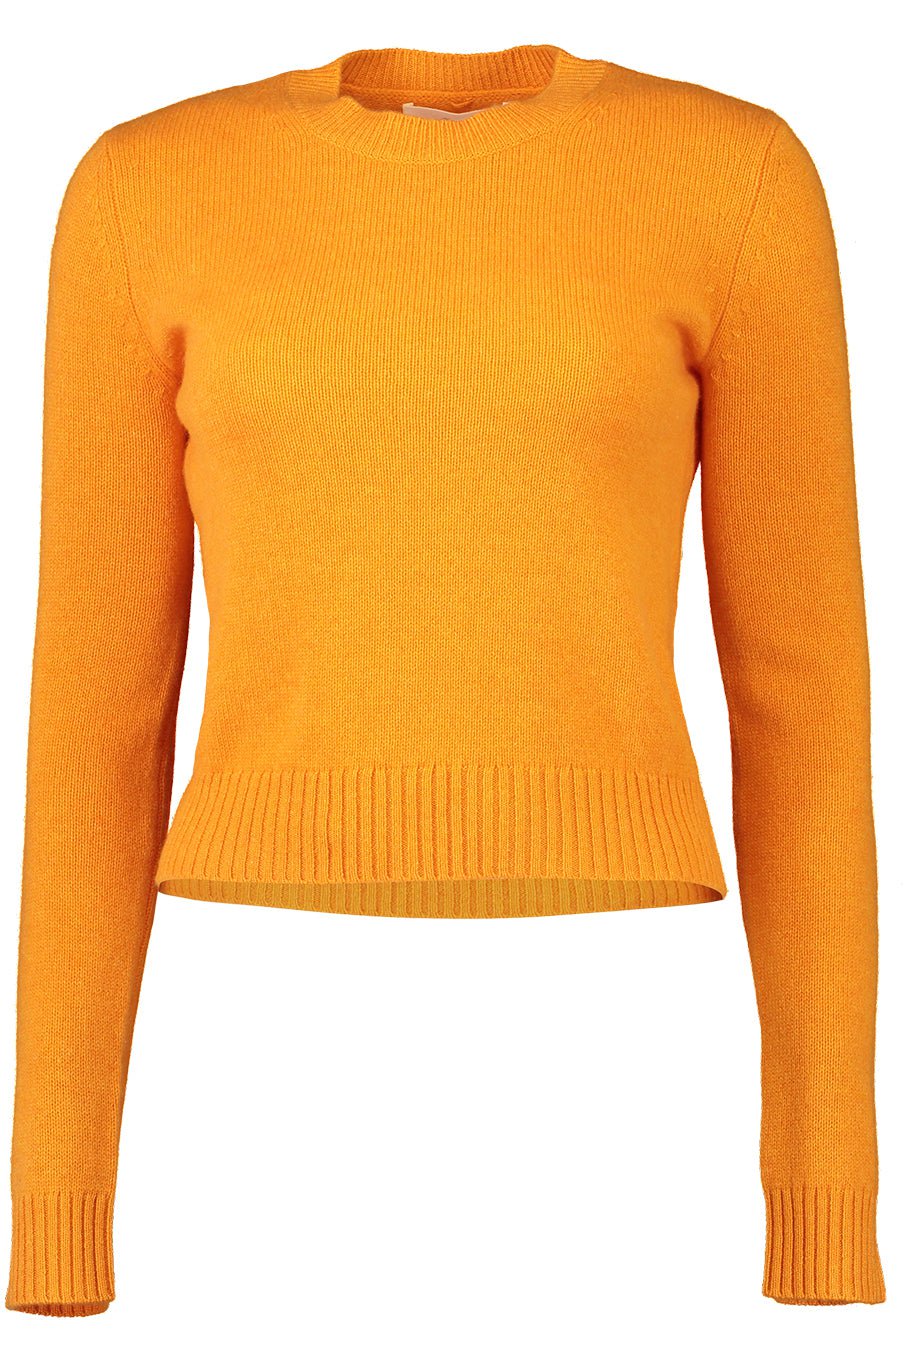 Mable Sweater - Apricot – Marissa Collections